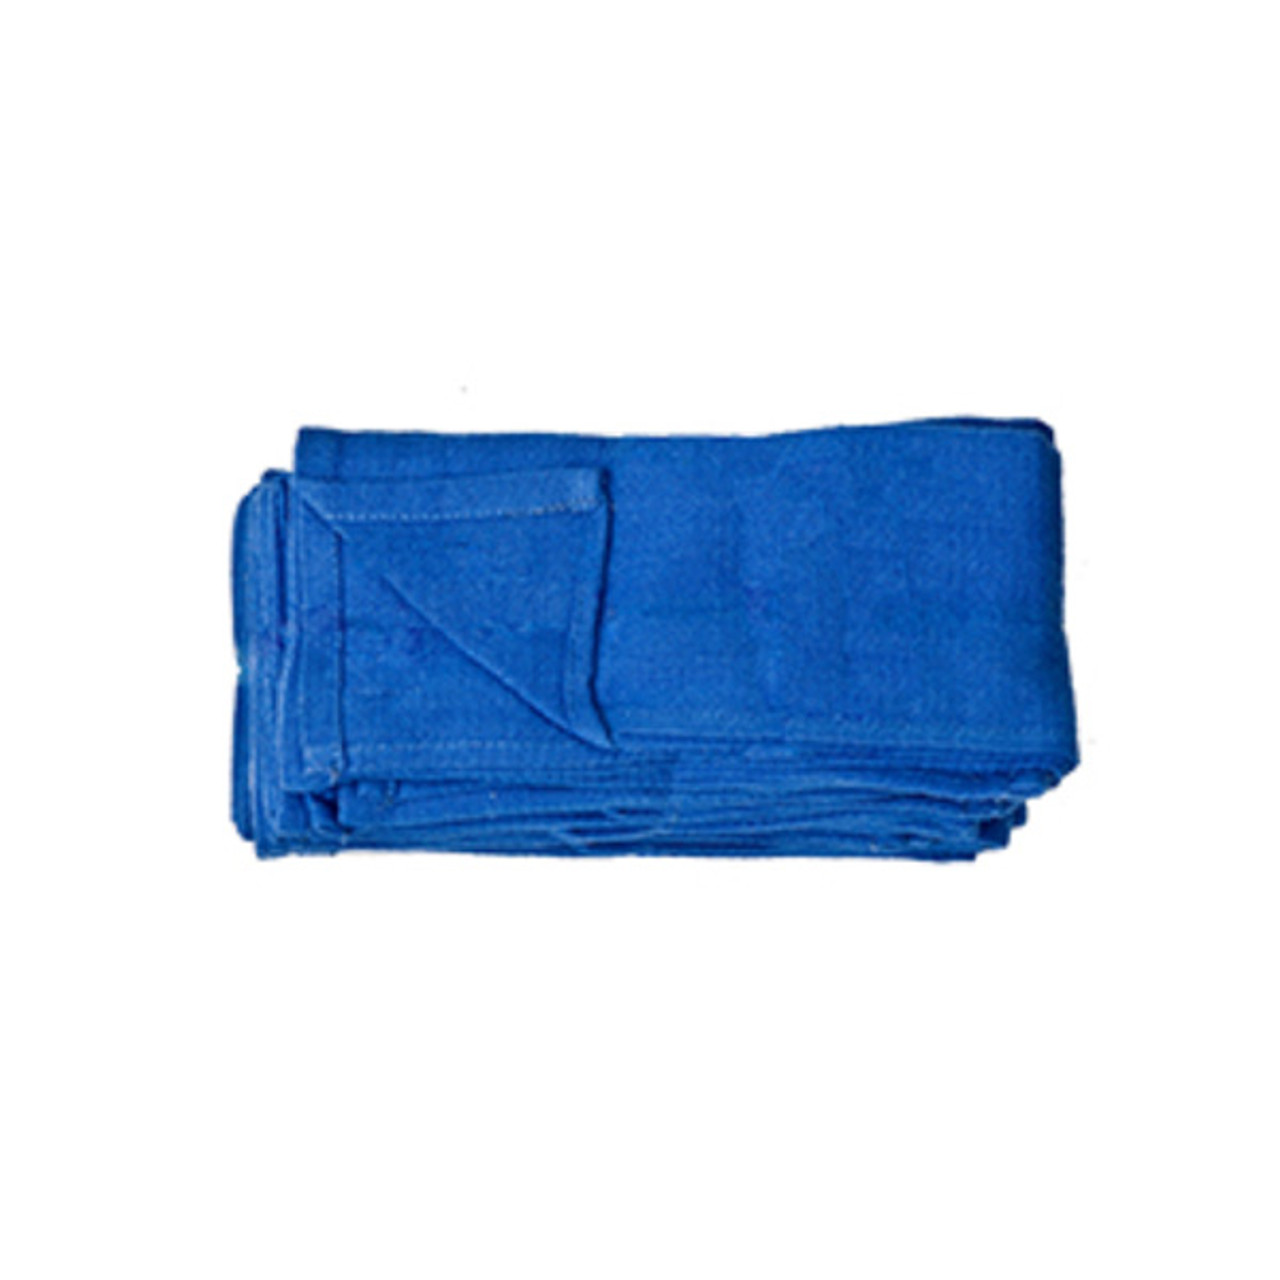 Cotton Huck Towels, 22 x 22, pack of 12